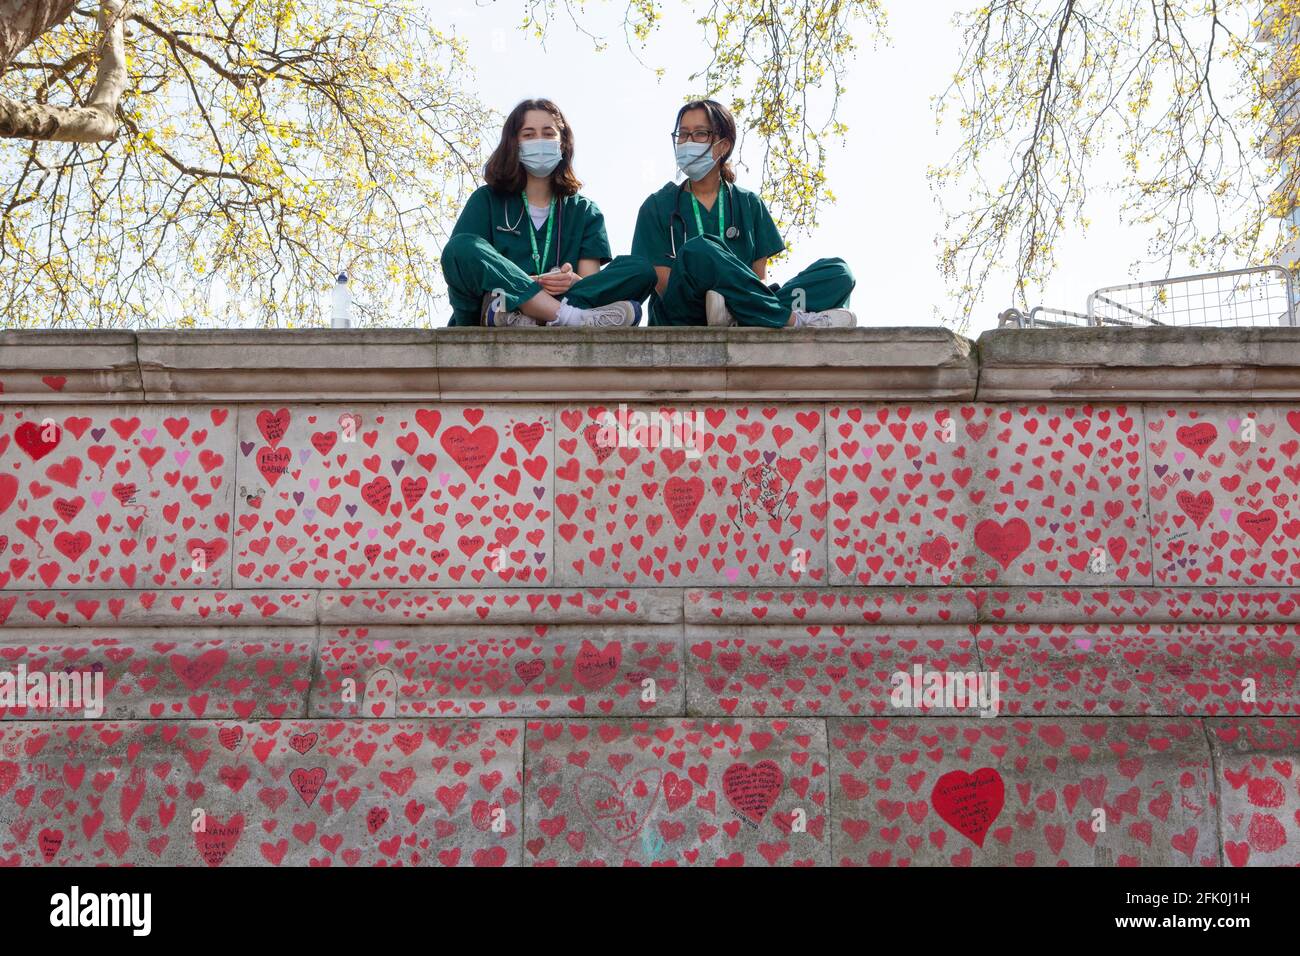 London, UK, 27 April 2021: Student doctors Charlie and Surina take a break sitting above the National Covid Memorial Wall as Prime Minister Boris Johnson still faces accusations of having preferred that 'bodies pile up' rather than have a third lockdown. With one heart drawn for each of the over 150,000 people who died in the UK coronavirus pandemic, the memorial stretches along the wall of St Thomas's Hospital, facing the Houses of Parliament on the opposite bank of the River Thames. Anna Watson/Alamy Live News Stock Photo